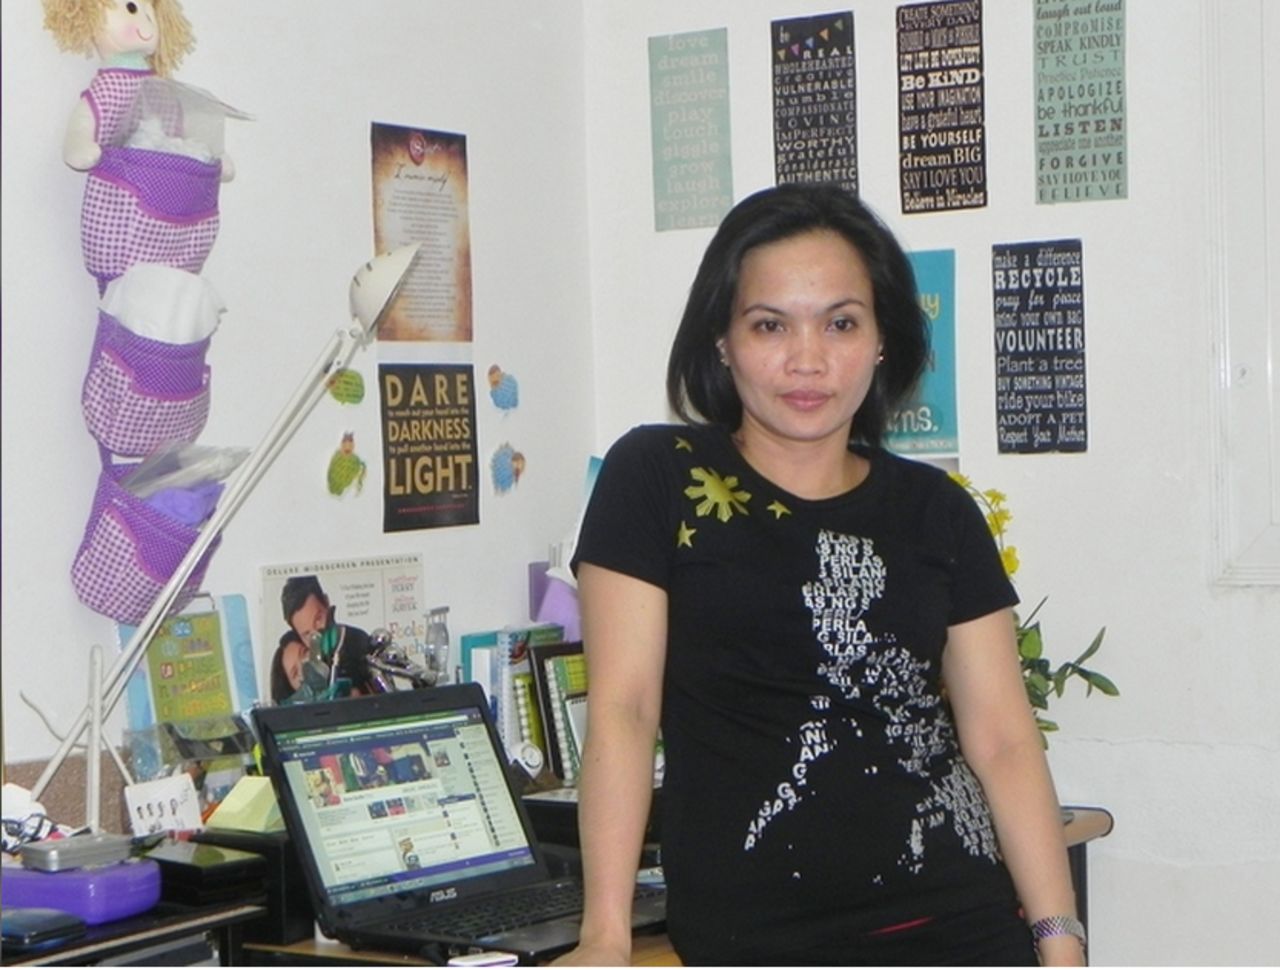 <a href="http://ireport.cnn.com/docs/DOC-929155">Niena Sevilla </a>displays her pride for her homeland with her favorite shirt, which features a picture of the Philippines. "It tells a lot about my homeland and my love for it," she said.